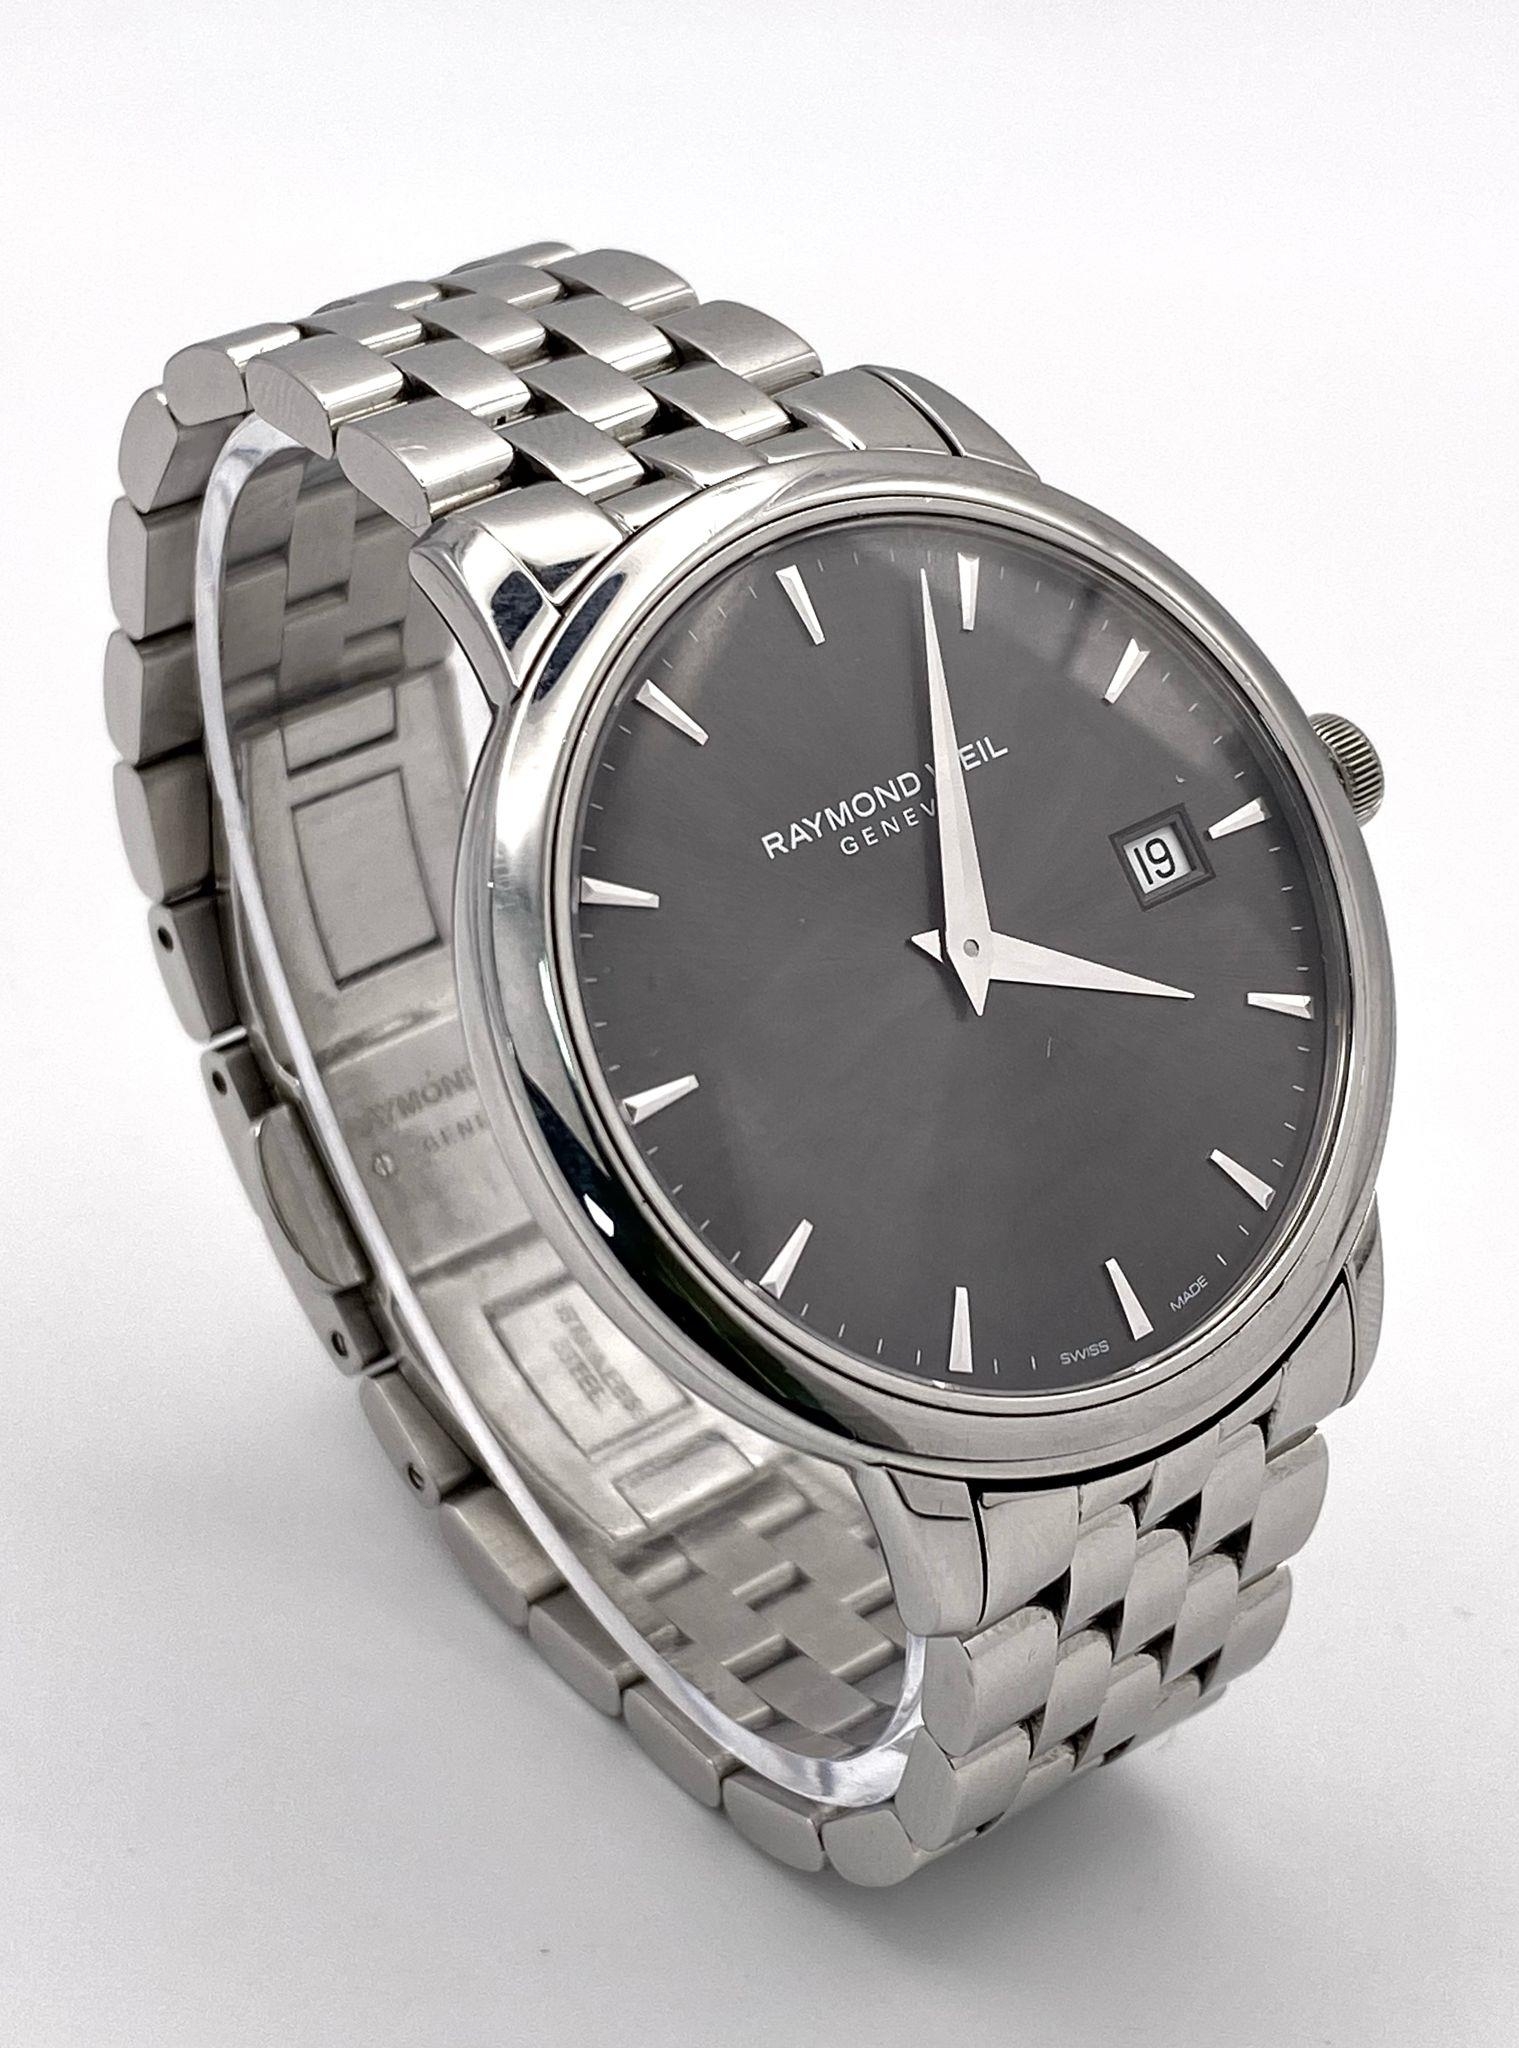 A Classic Raymond Weil Geneve Quartz Gents Watch. Stainless steel bracelet and case - 39mm. Silver